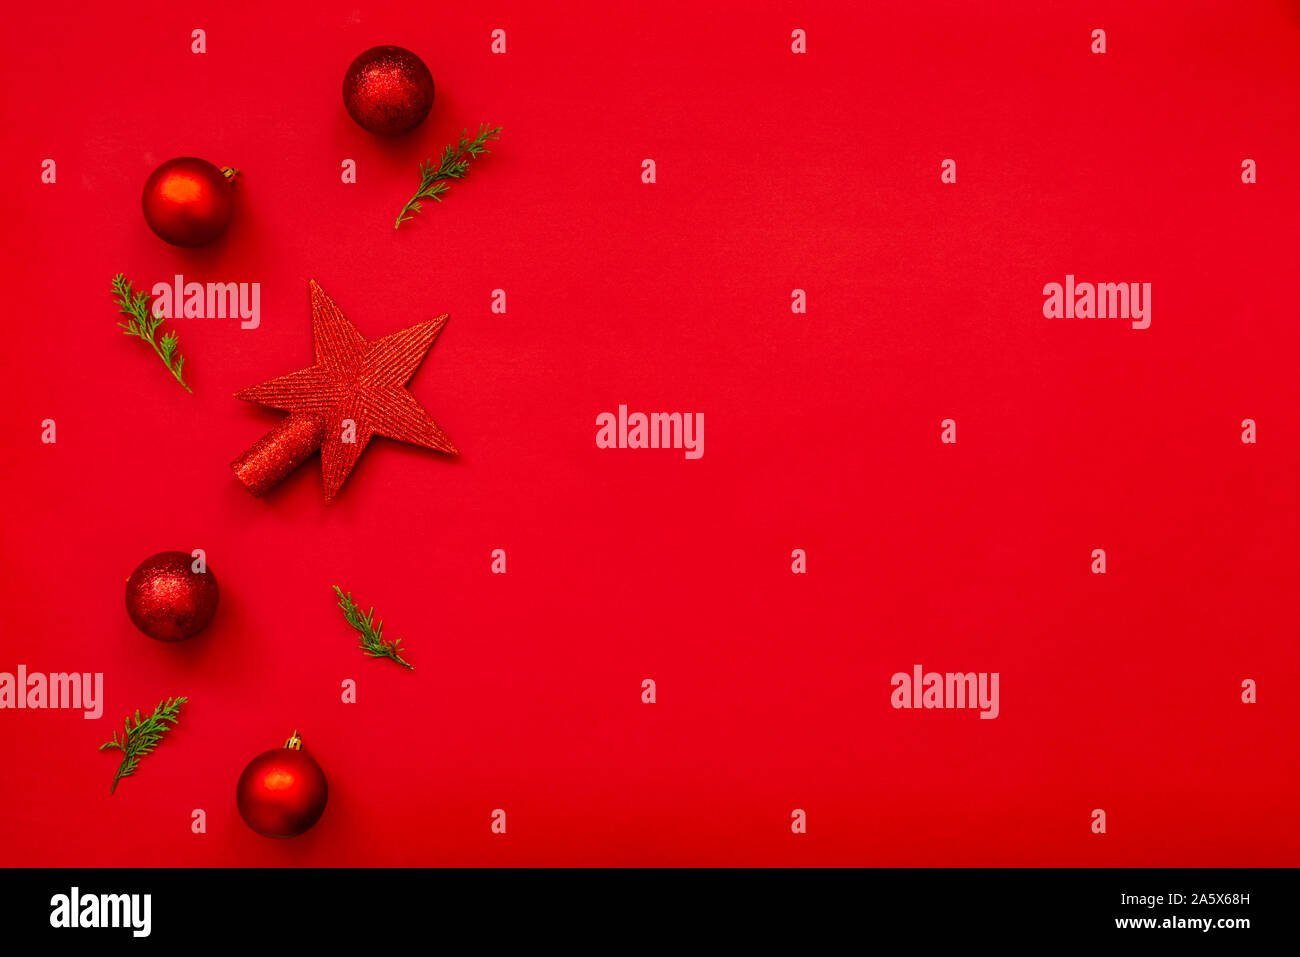 Christmas background - flat lay of red christmas balls, pine cones and fir branches over red background. Copy space. Stock Photo